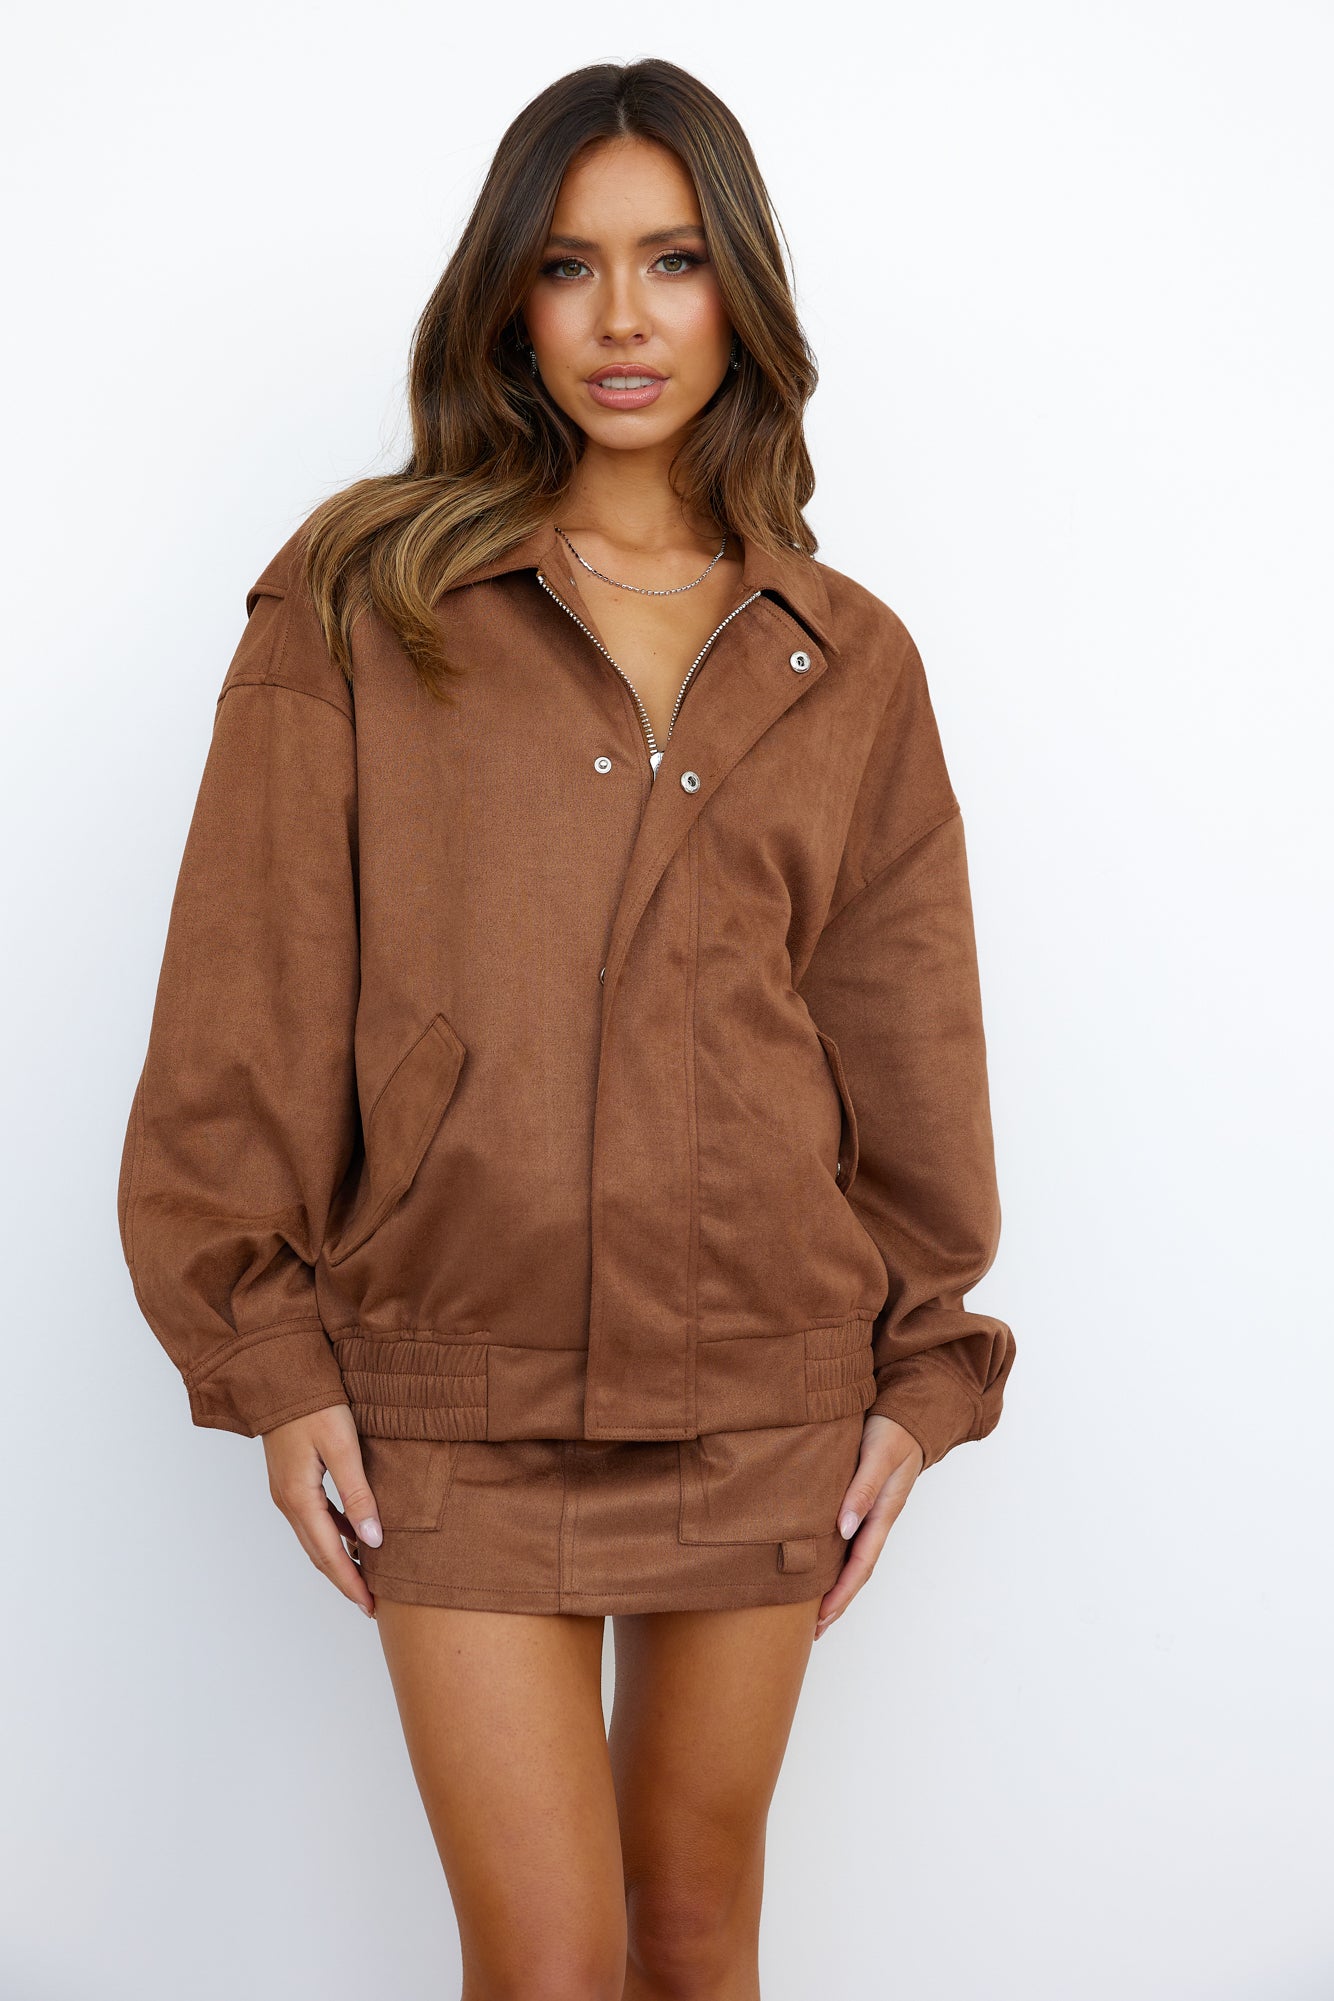 LIONESS Kenny Bomber Jacket Sepia Brown